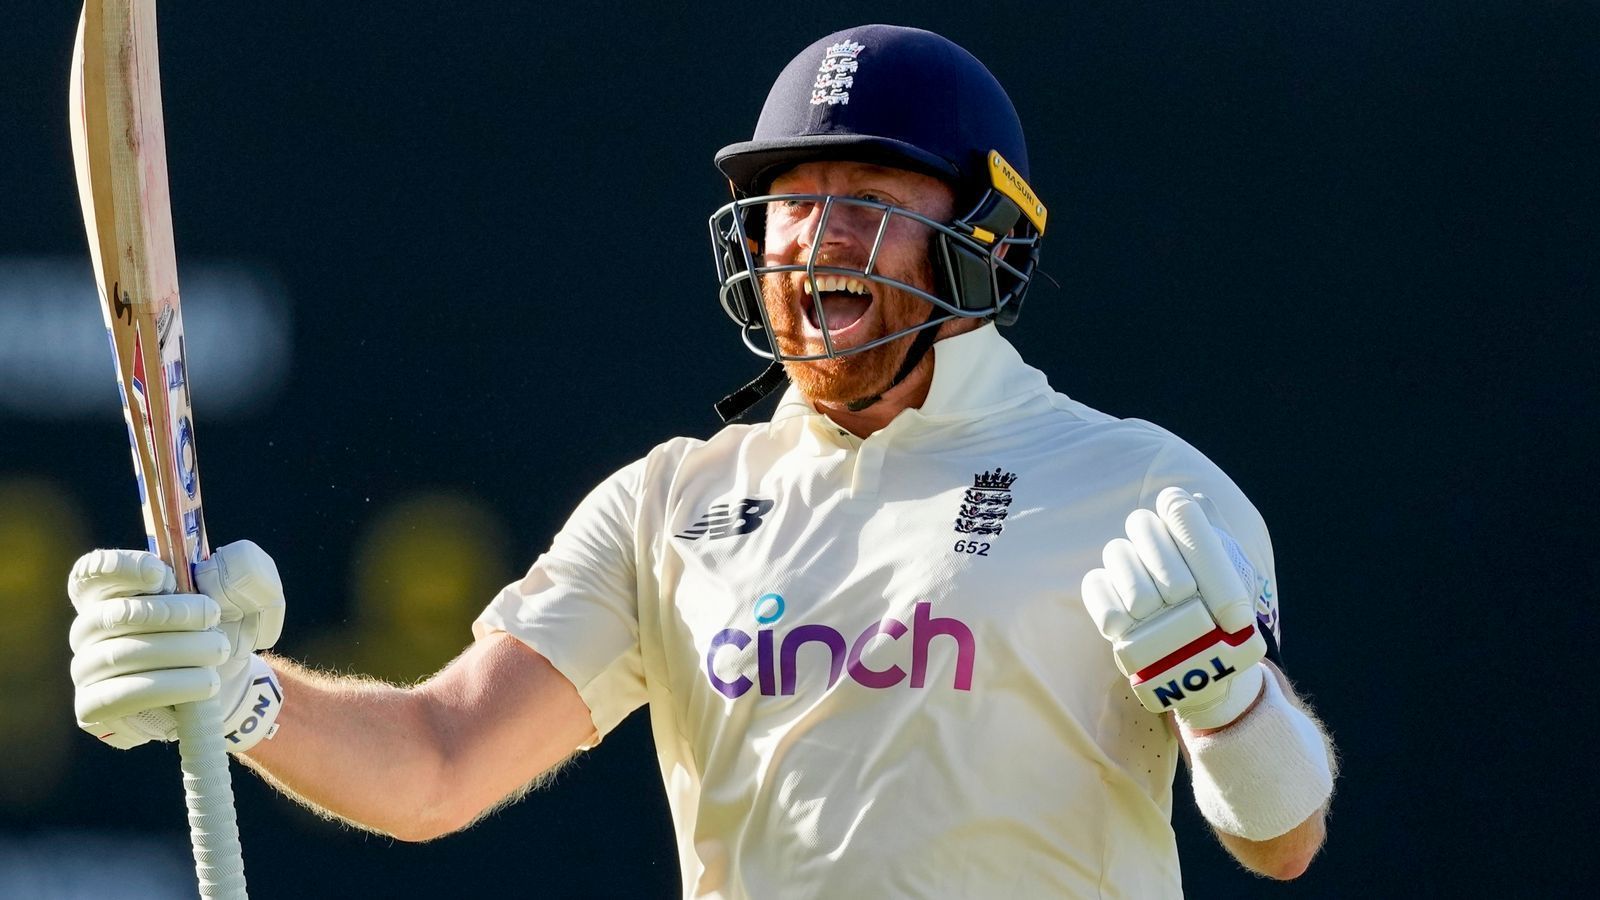 Jonny Bairstow played an incredible innings of 136 off 92 as he narrowly missed out on becoming the fastest England batter to score a ton, which came off 77 balls.